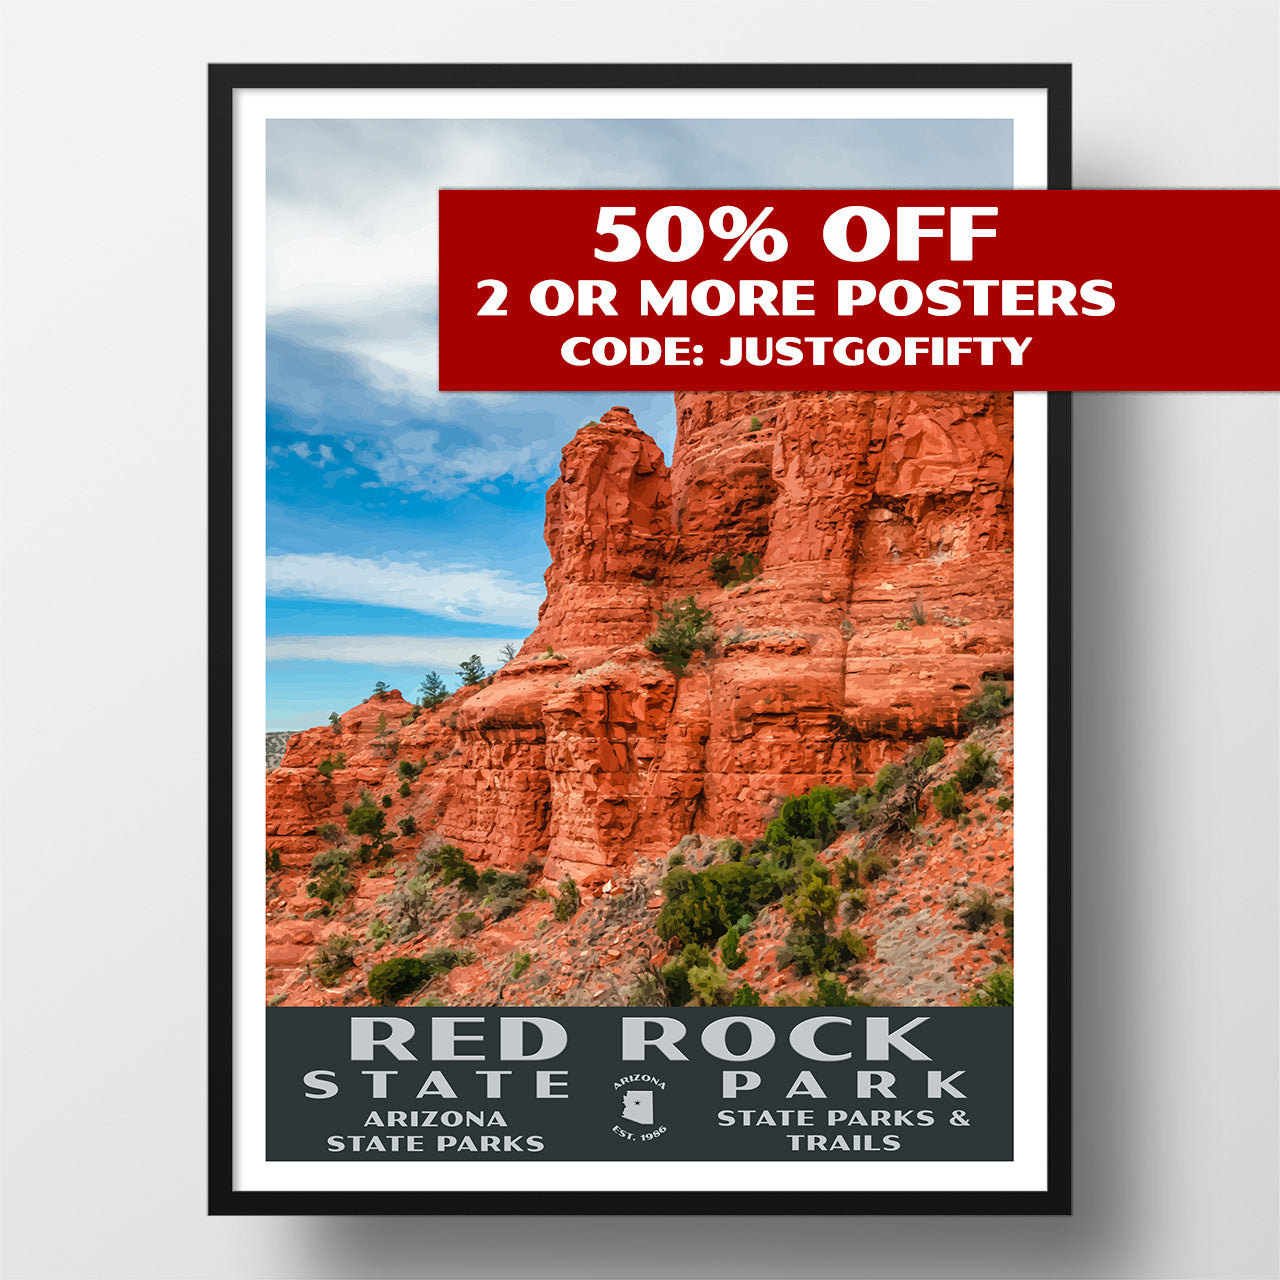 Red Rock State Park poster